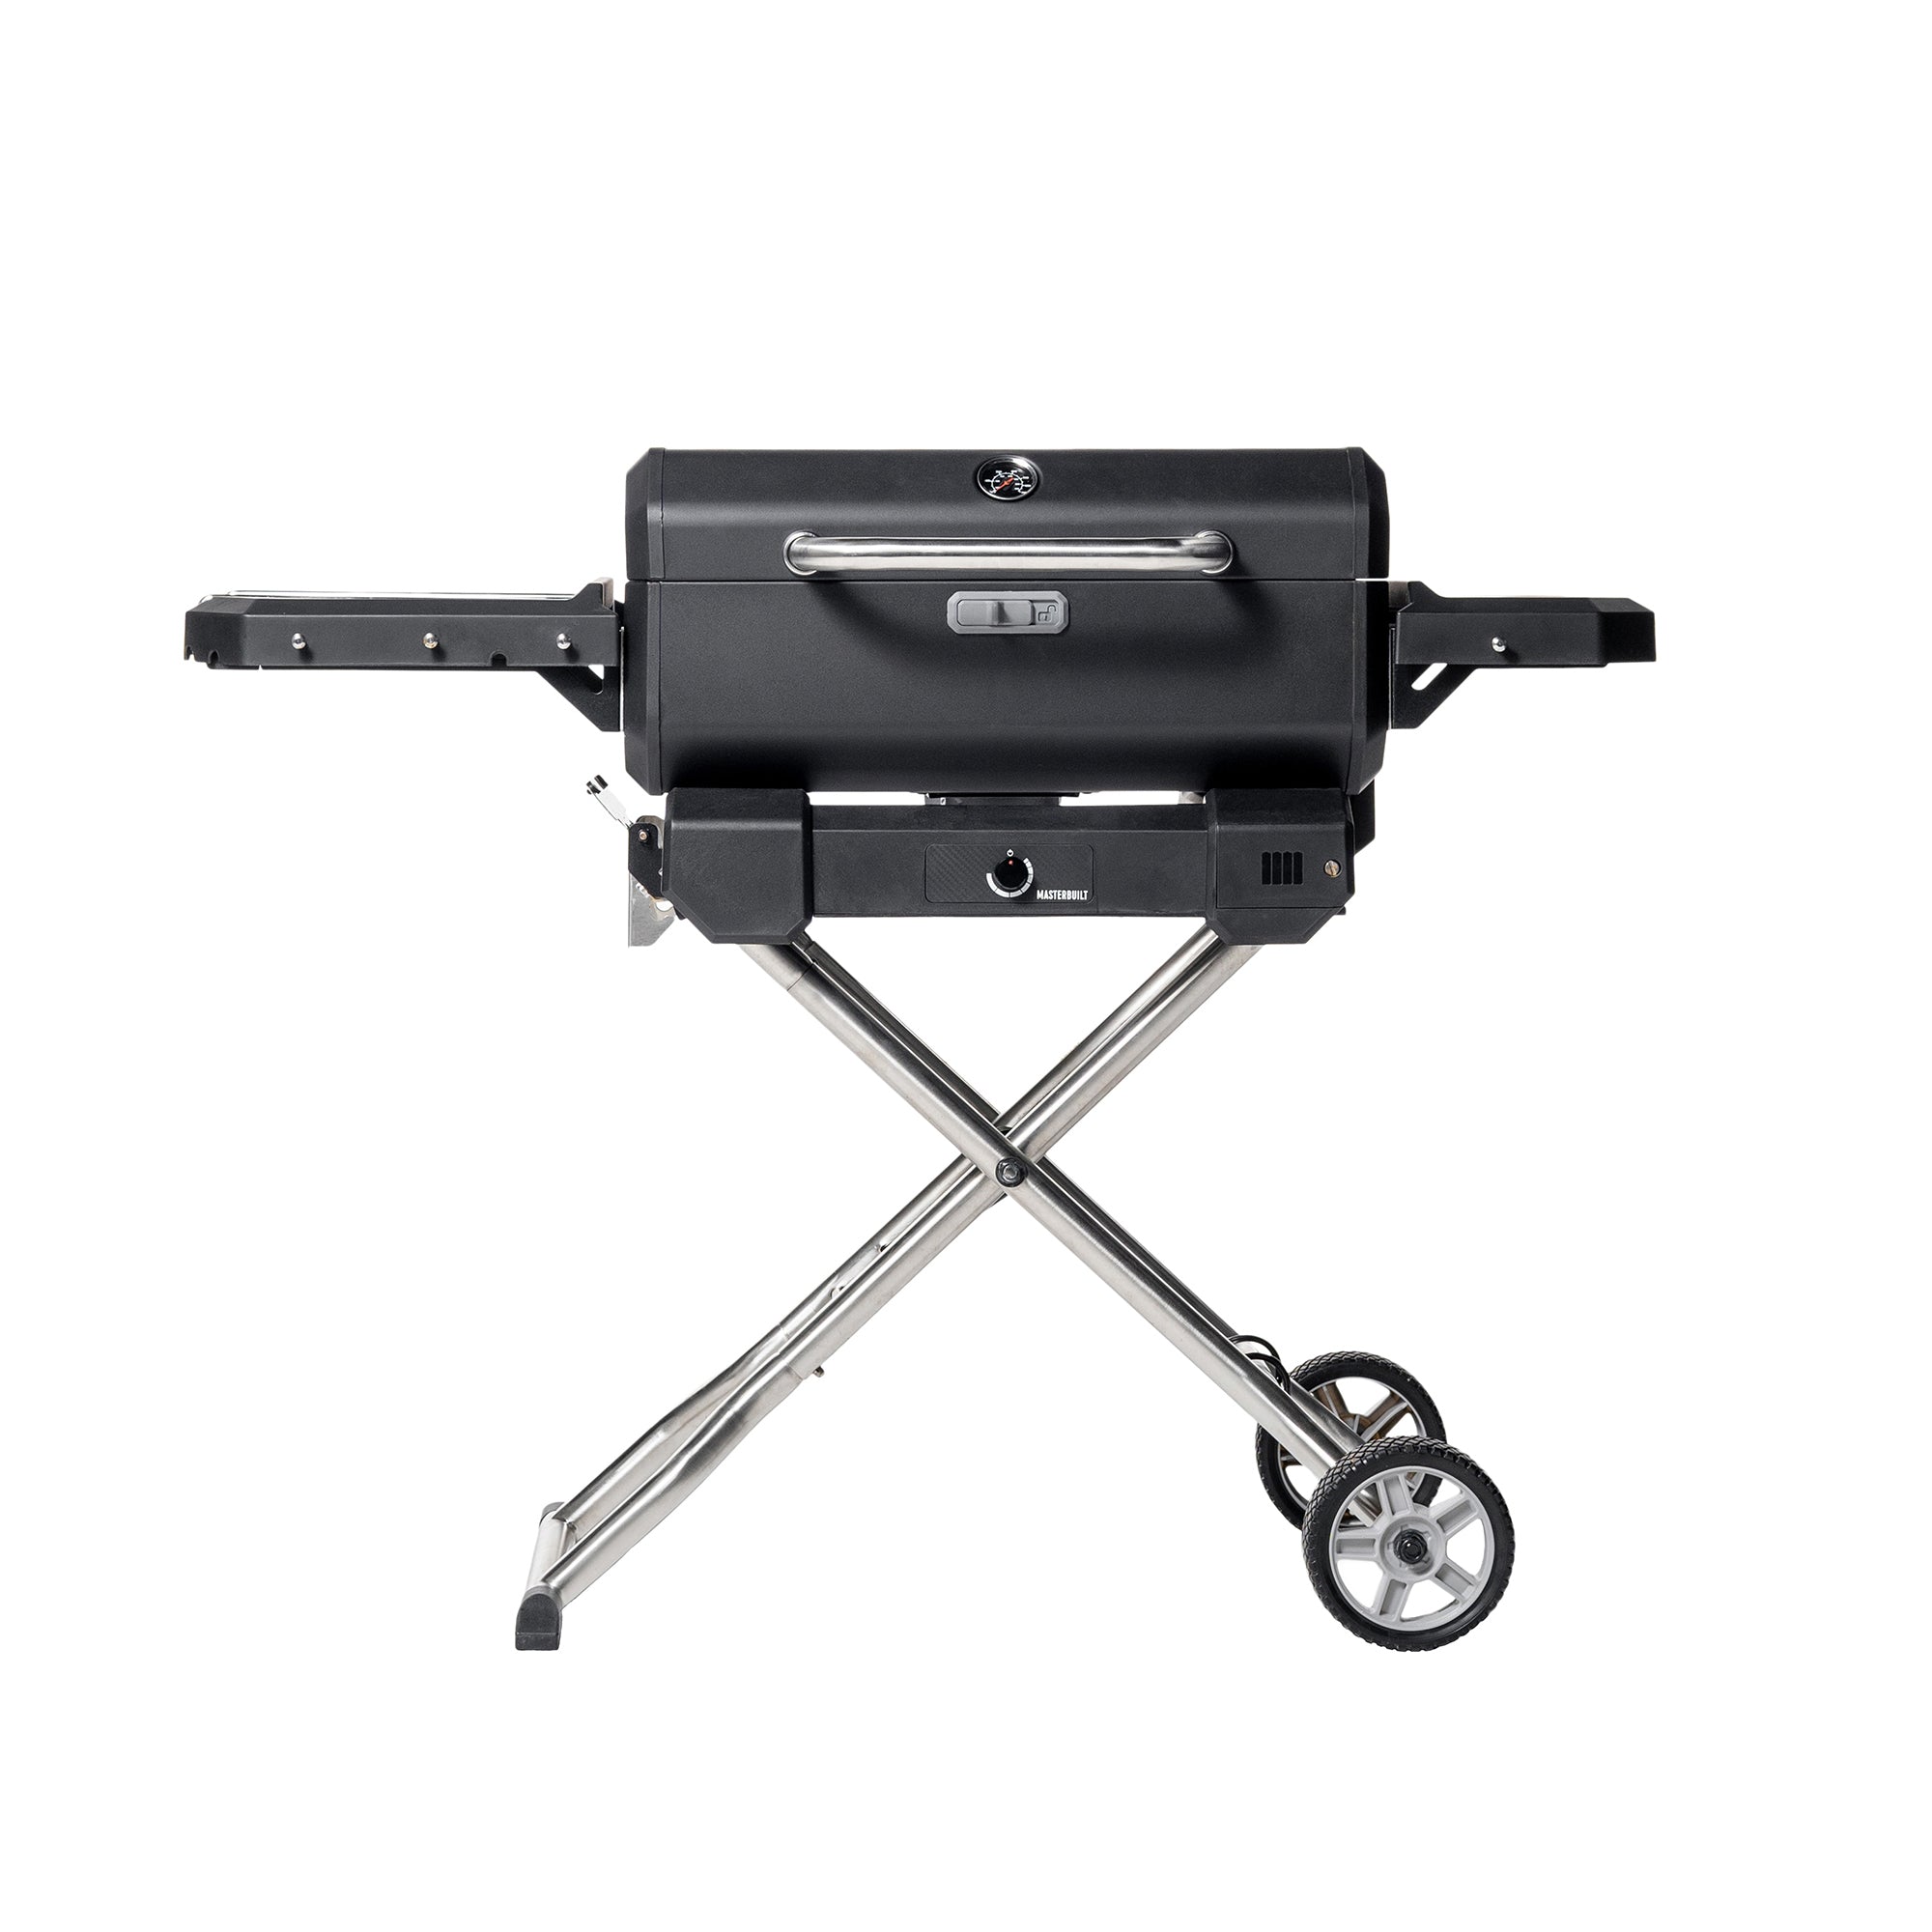 Portable size BBQ Grill *US SELLER* 14" Folding BBQ Charcoal Grill/ Convenient 